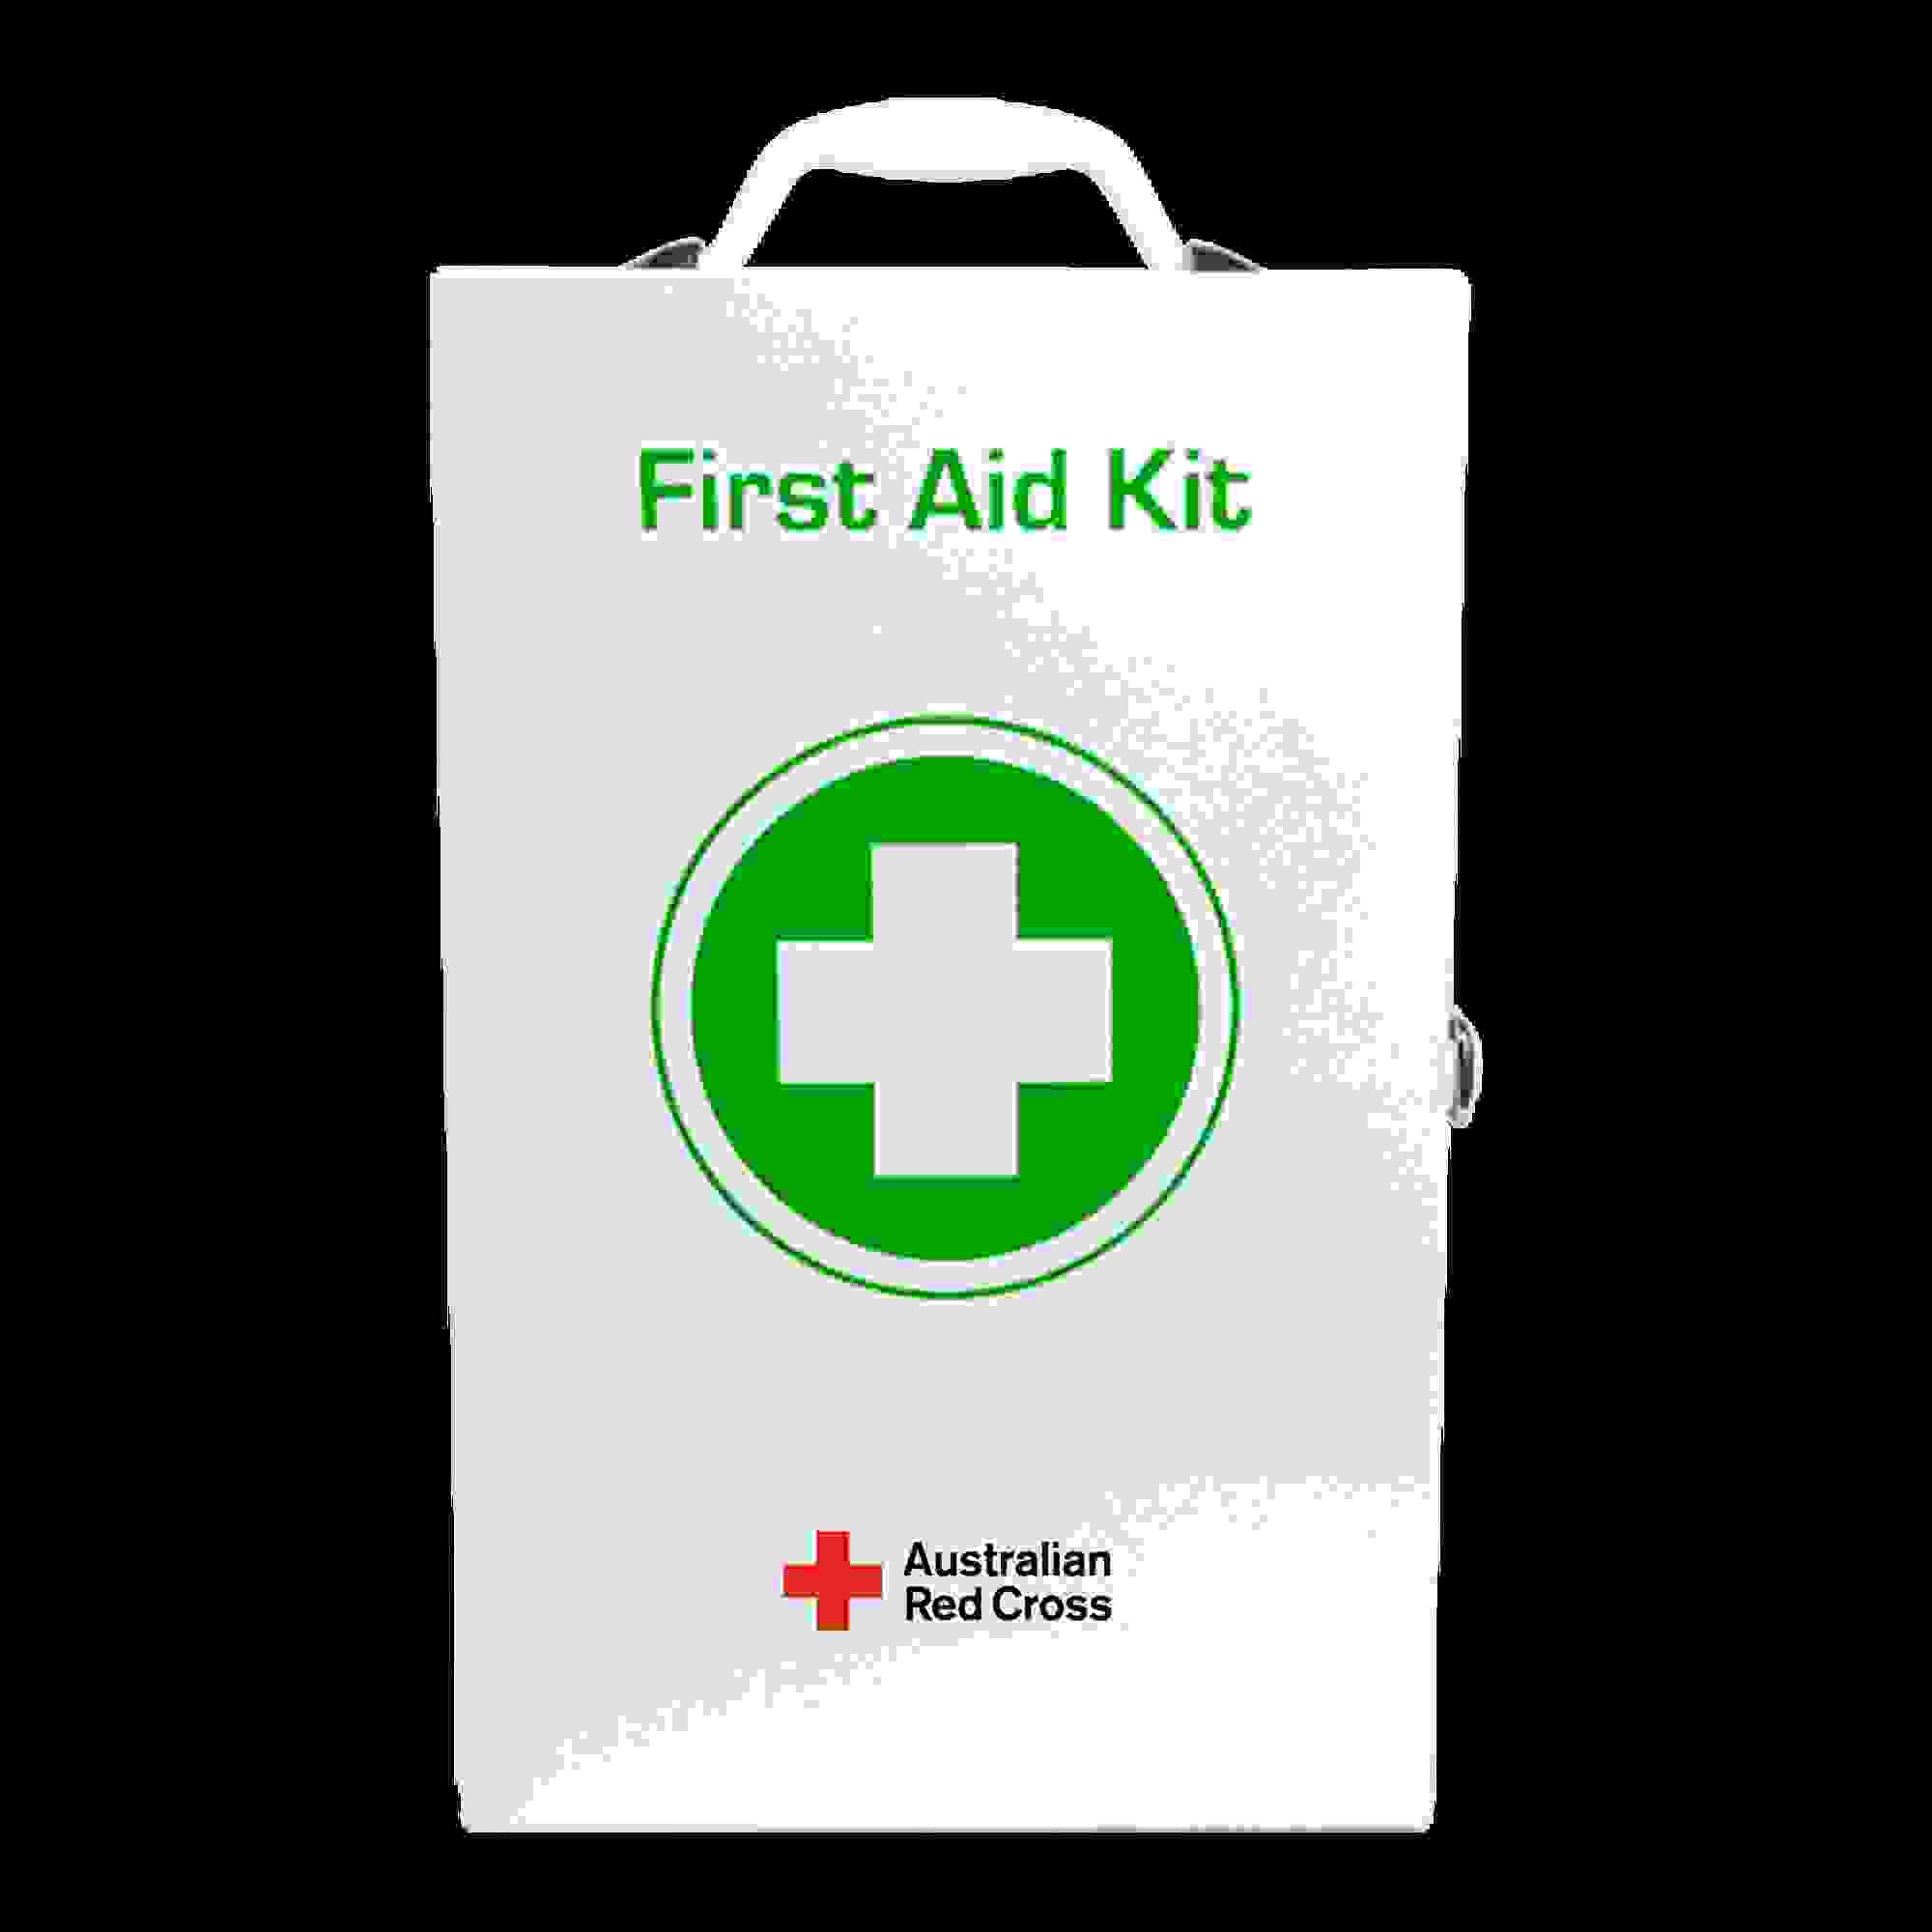 Workplace First Aid kit - Wall Mount